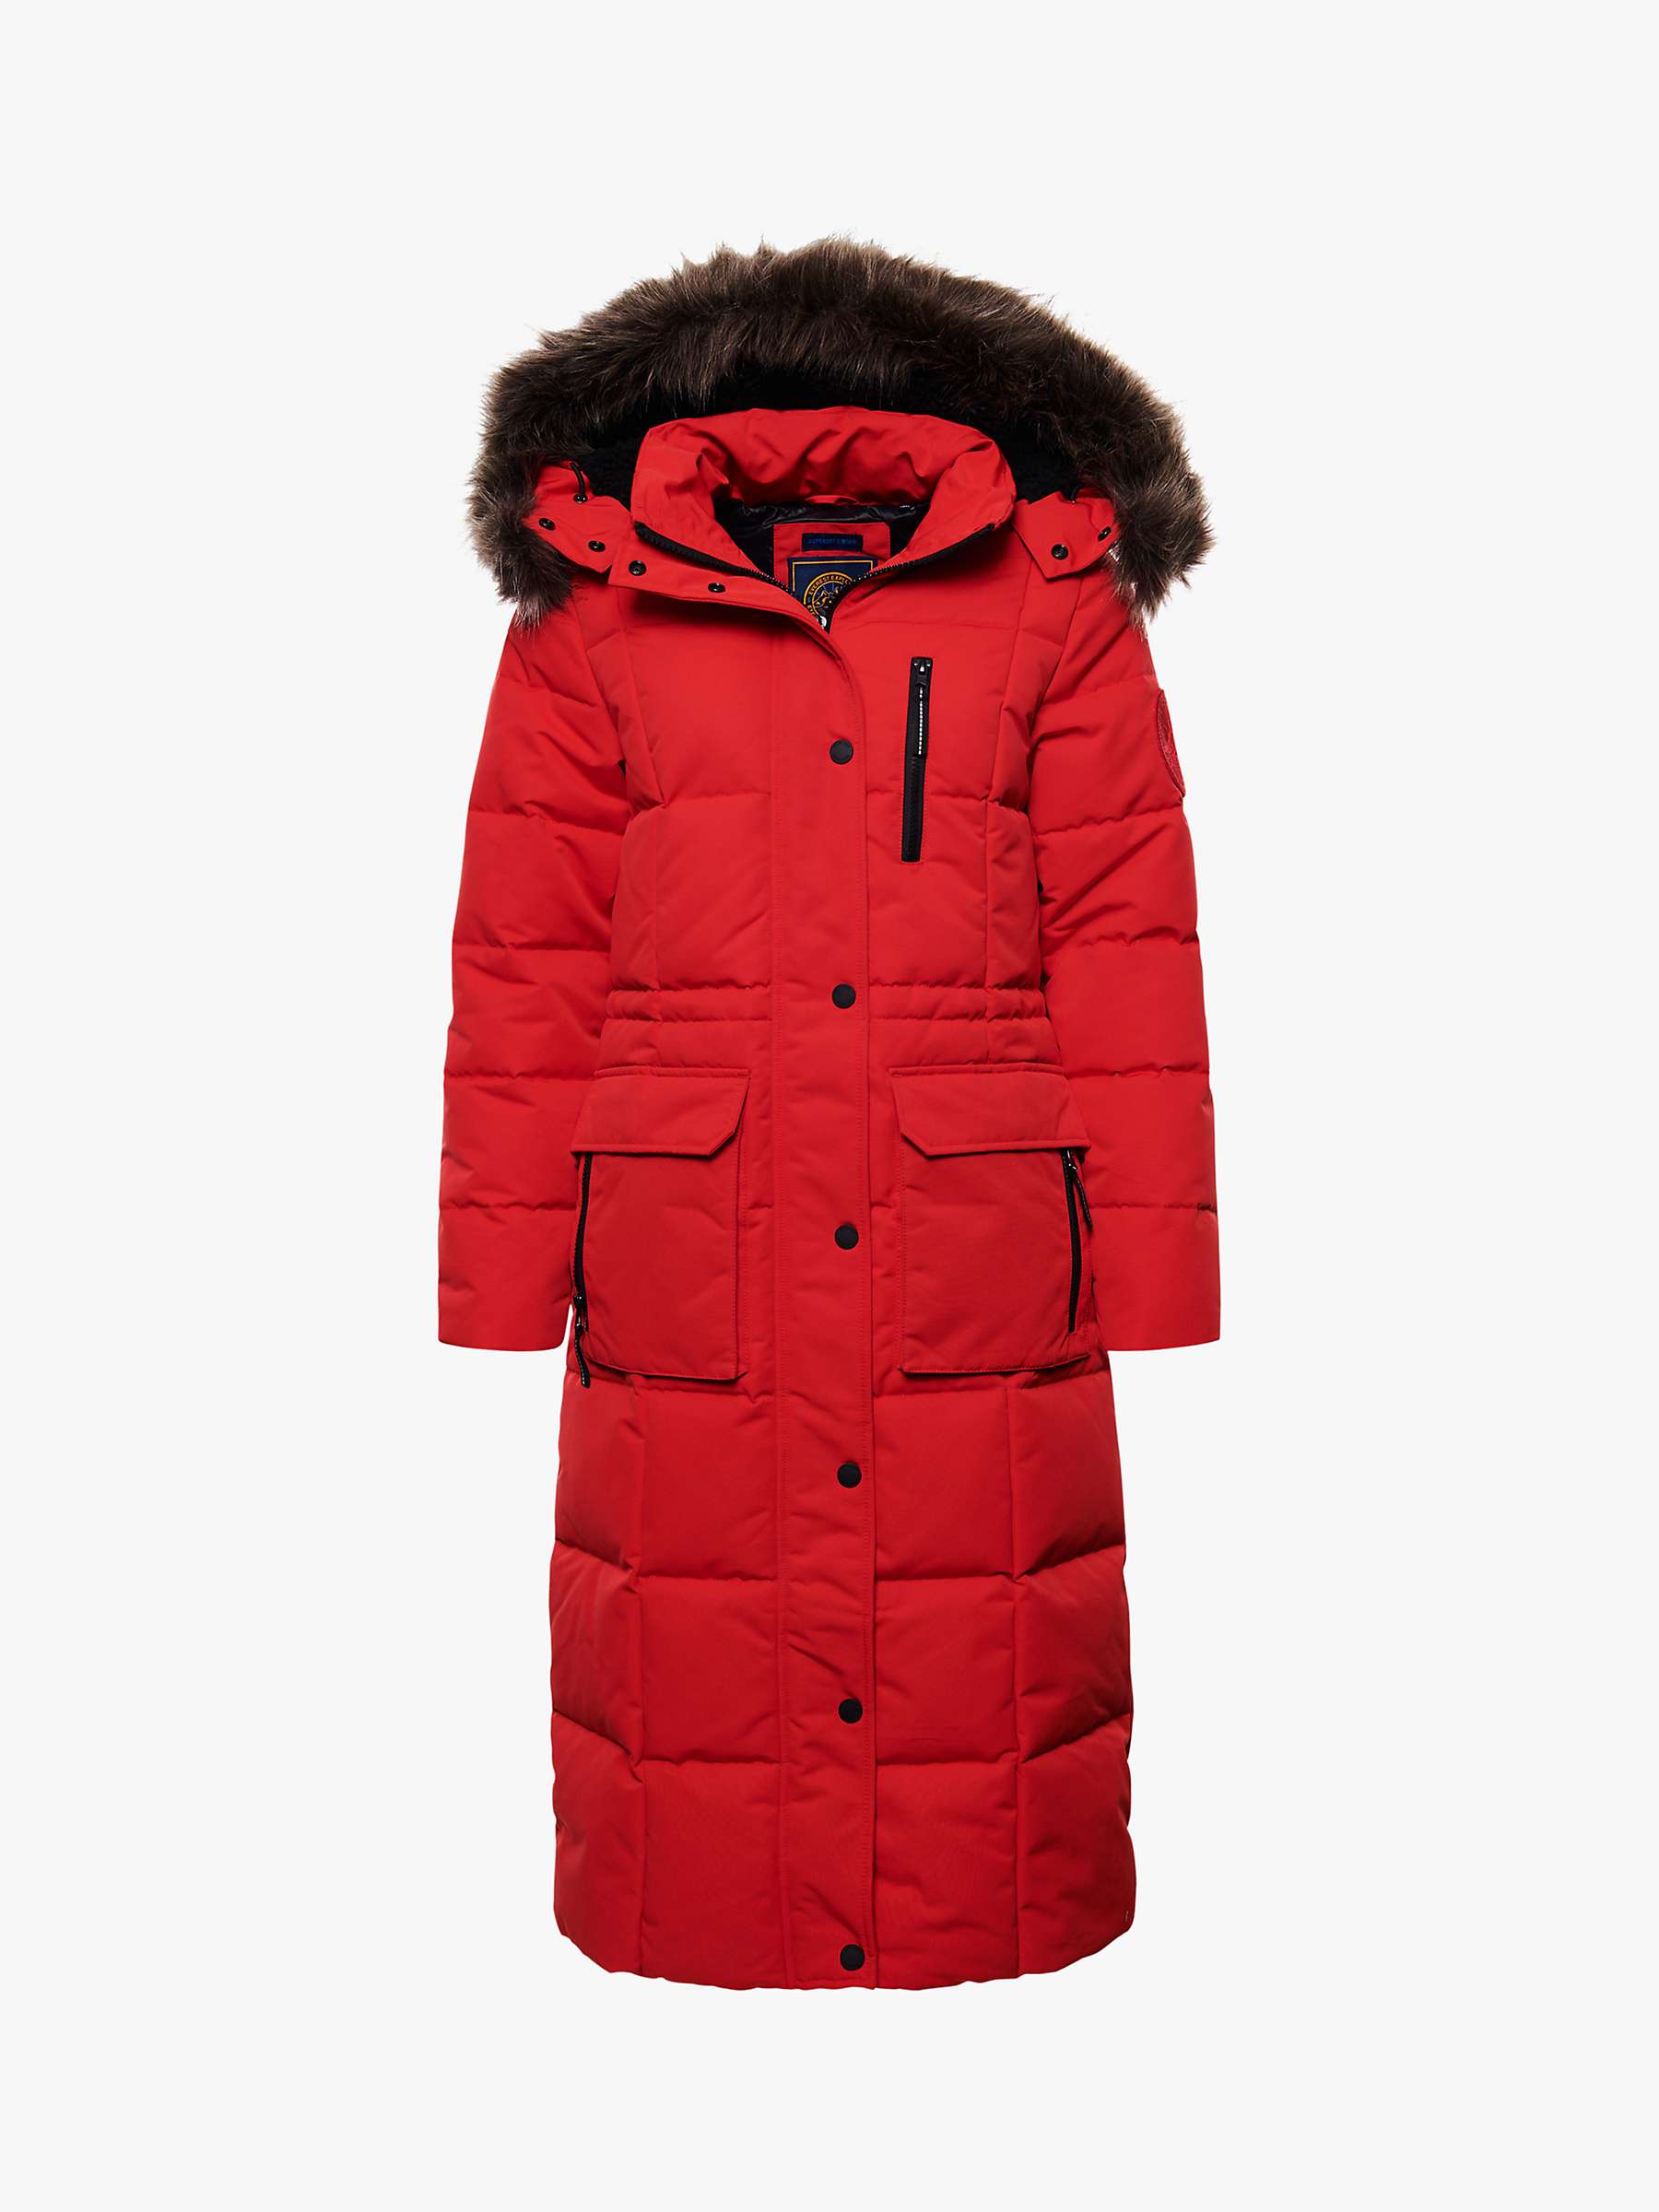 Buy Superdry Longline Faux Fur Collar Quilted Jacket Online at johnlewis.com